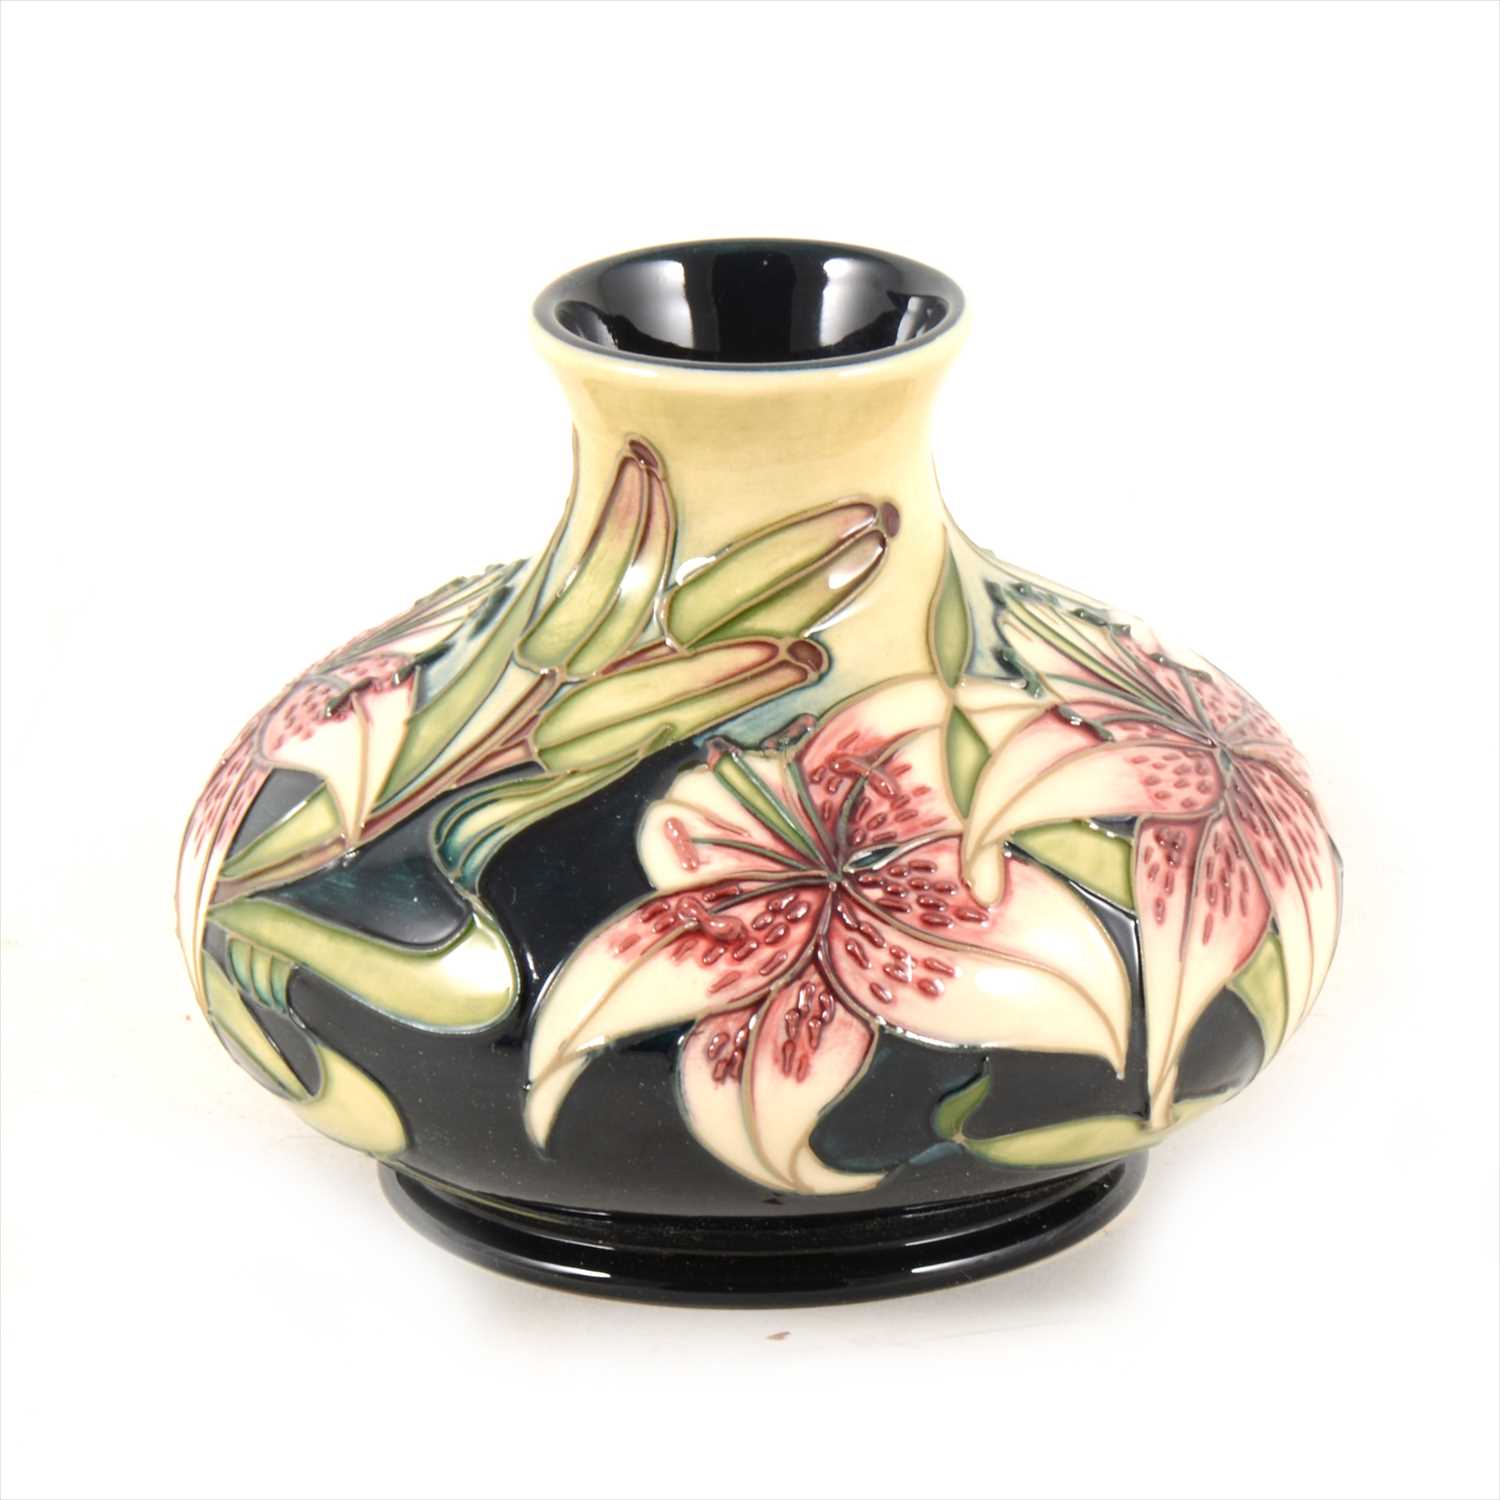 Lot 6 - A 'Lilies of the Field' vase, designed by Rachel Bishop for Moorcroft Pottery, 2002.